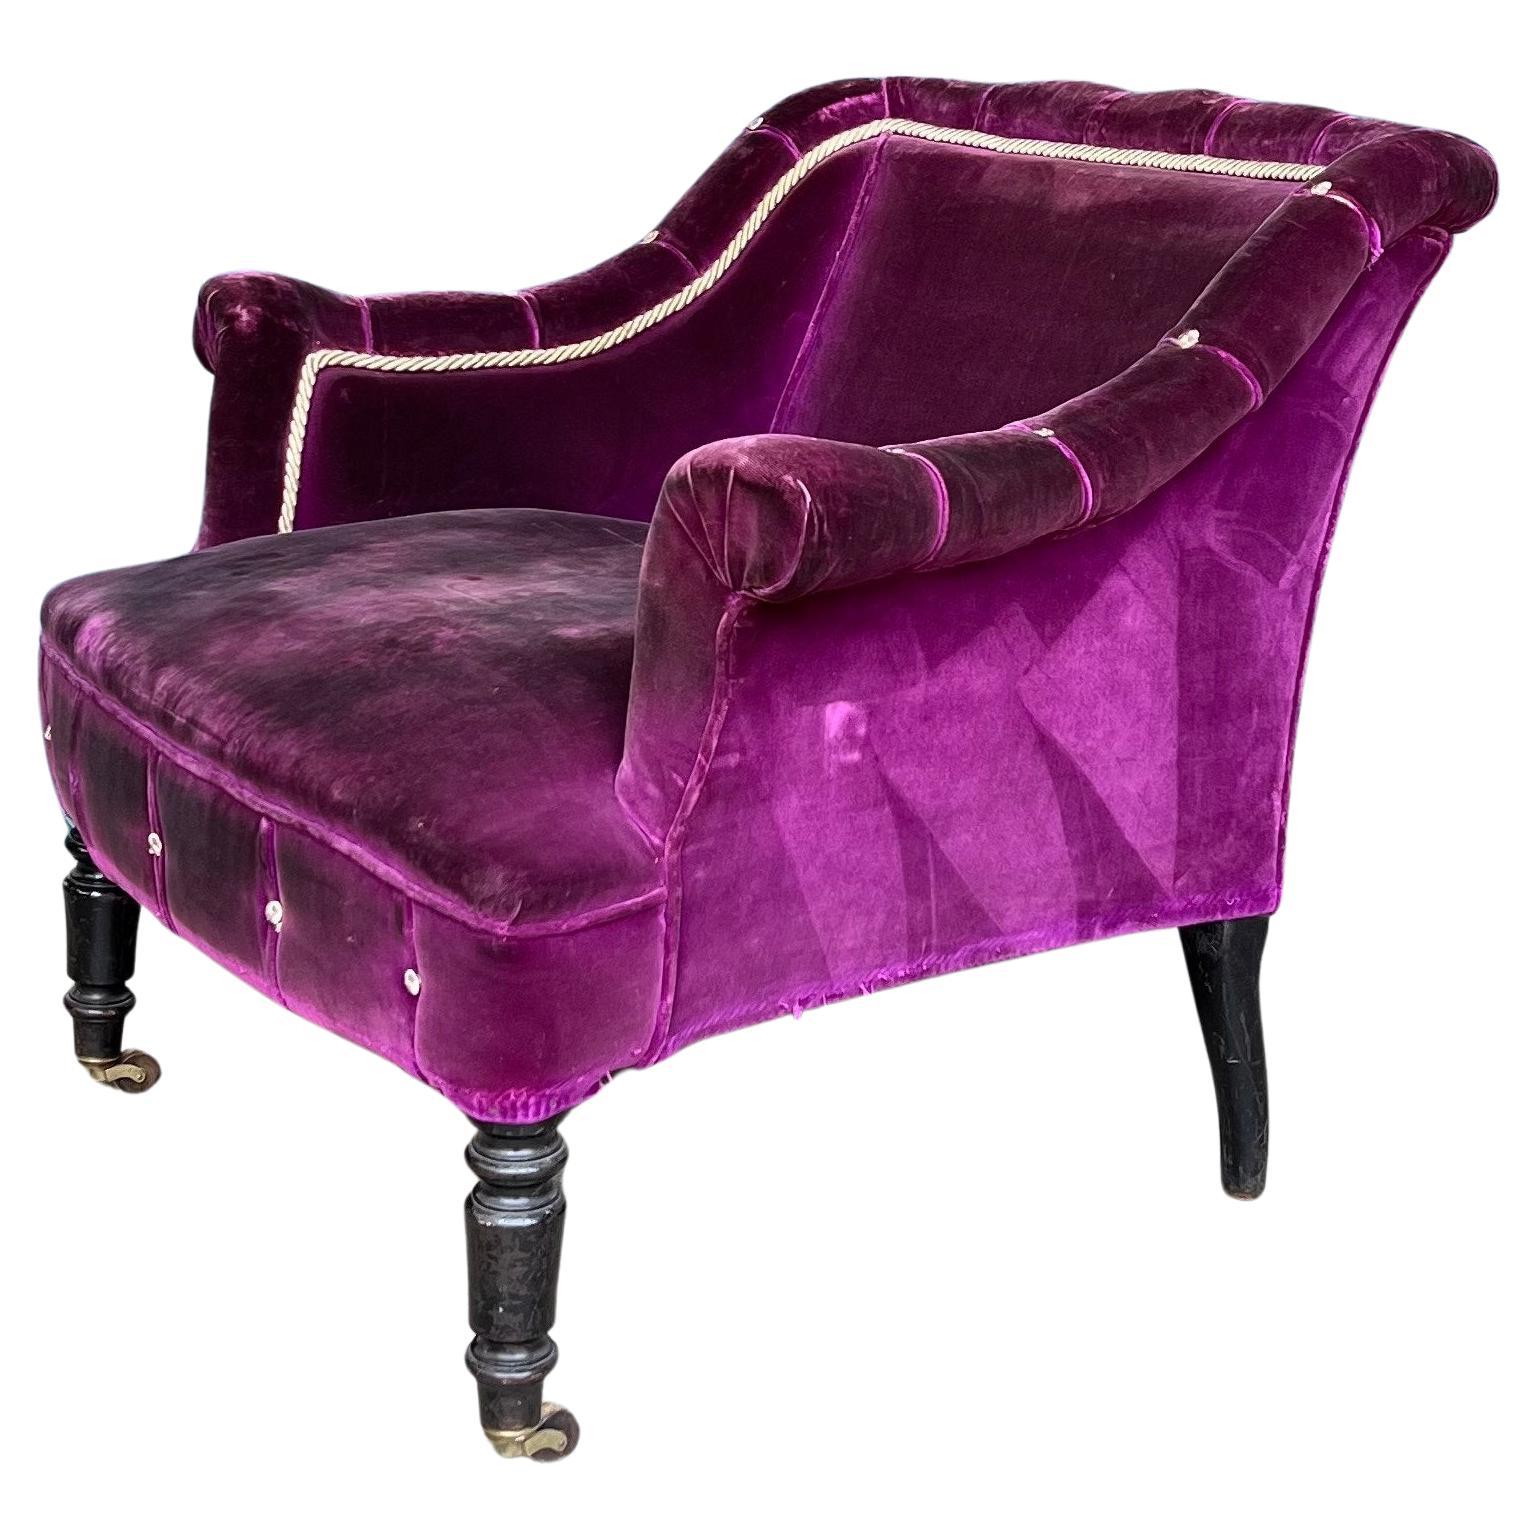 French 19th Century Armchair in Distressed Purple Velvet with White Braided Trim For Sale